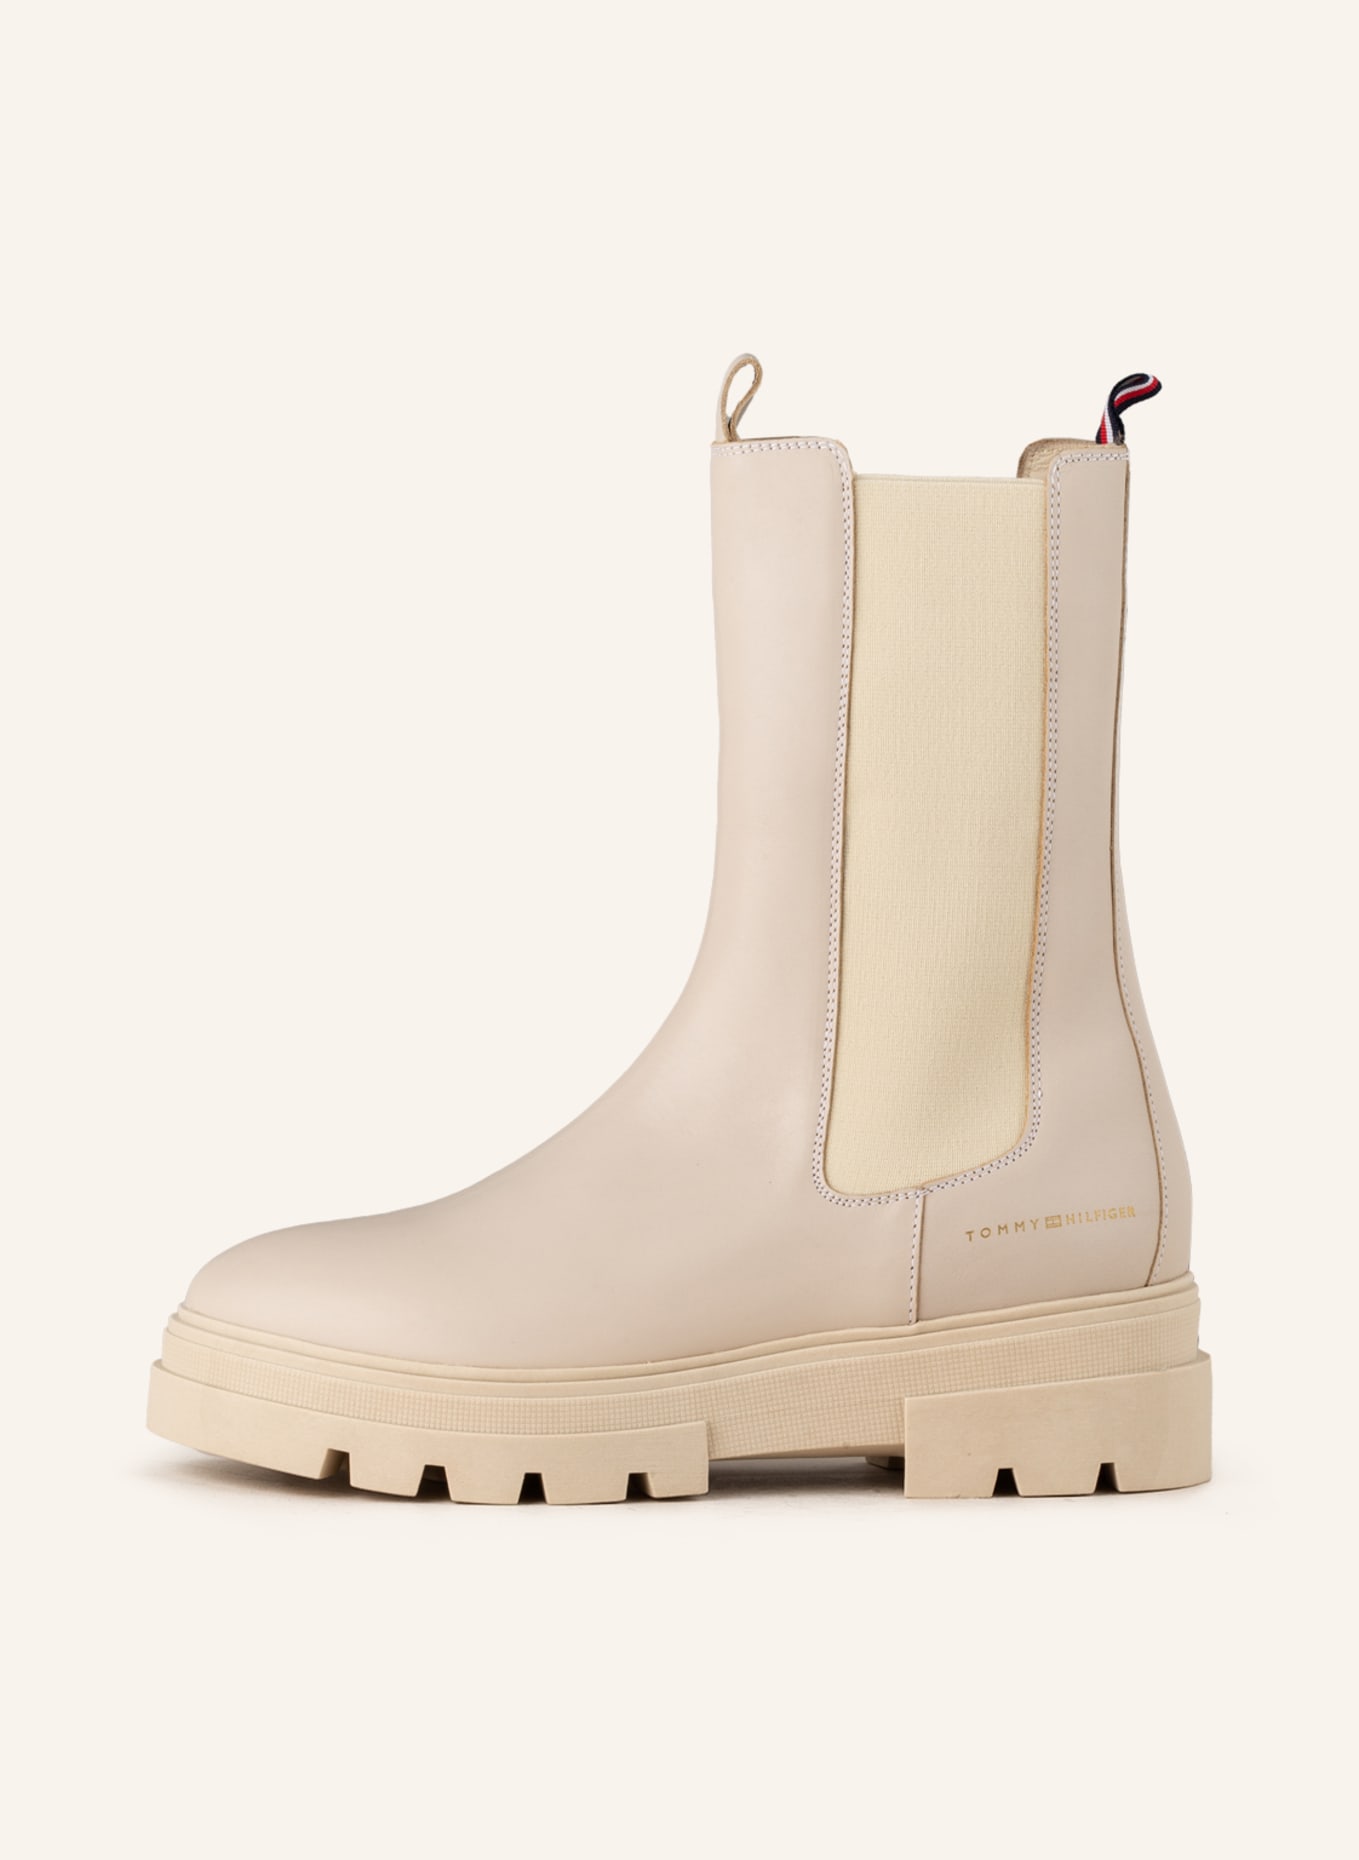 TOMMY HILFIGER Chelsea-Boots, Farbe: CREME (Bild 4)